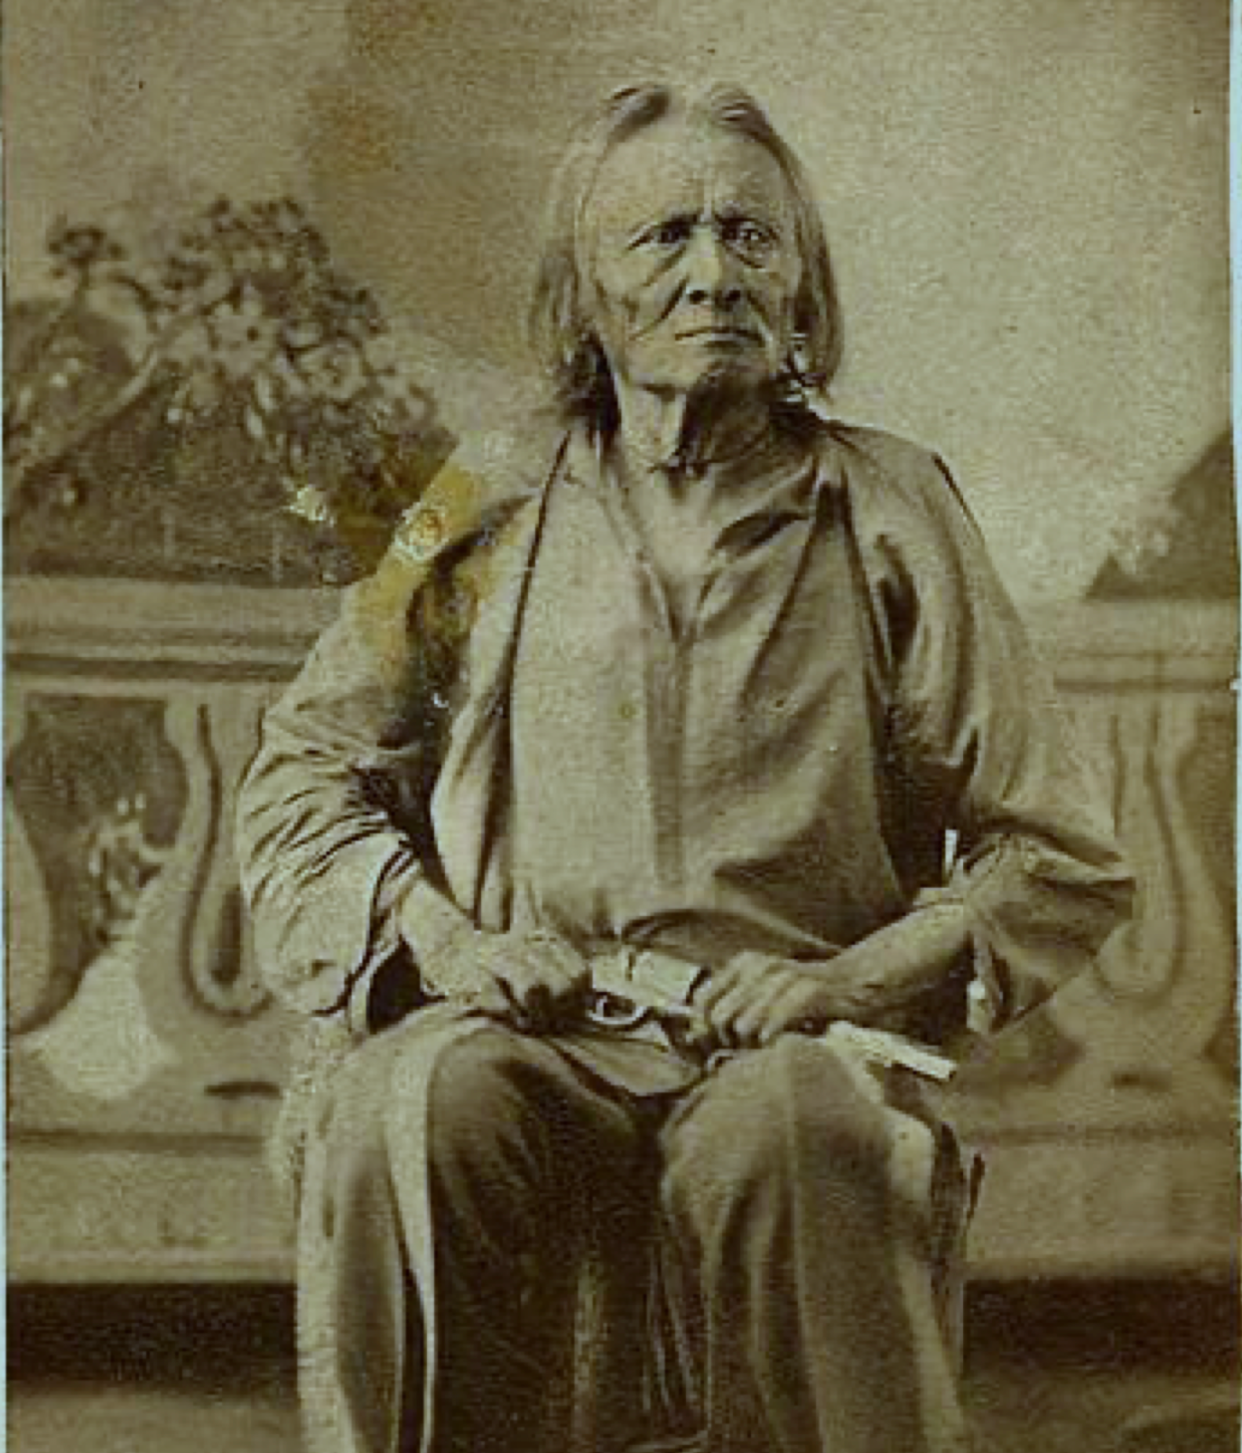 Tonkawa Chief Campo was among the leaders who interacted with Austinites during the 1840s.